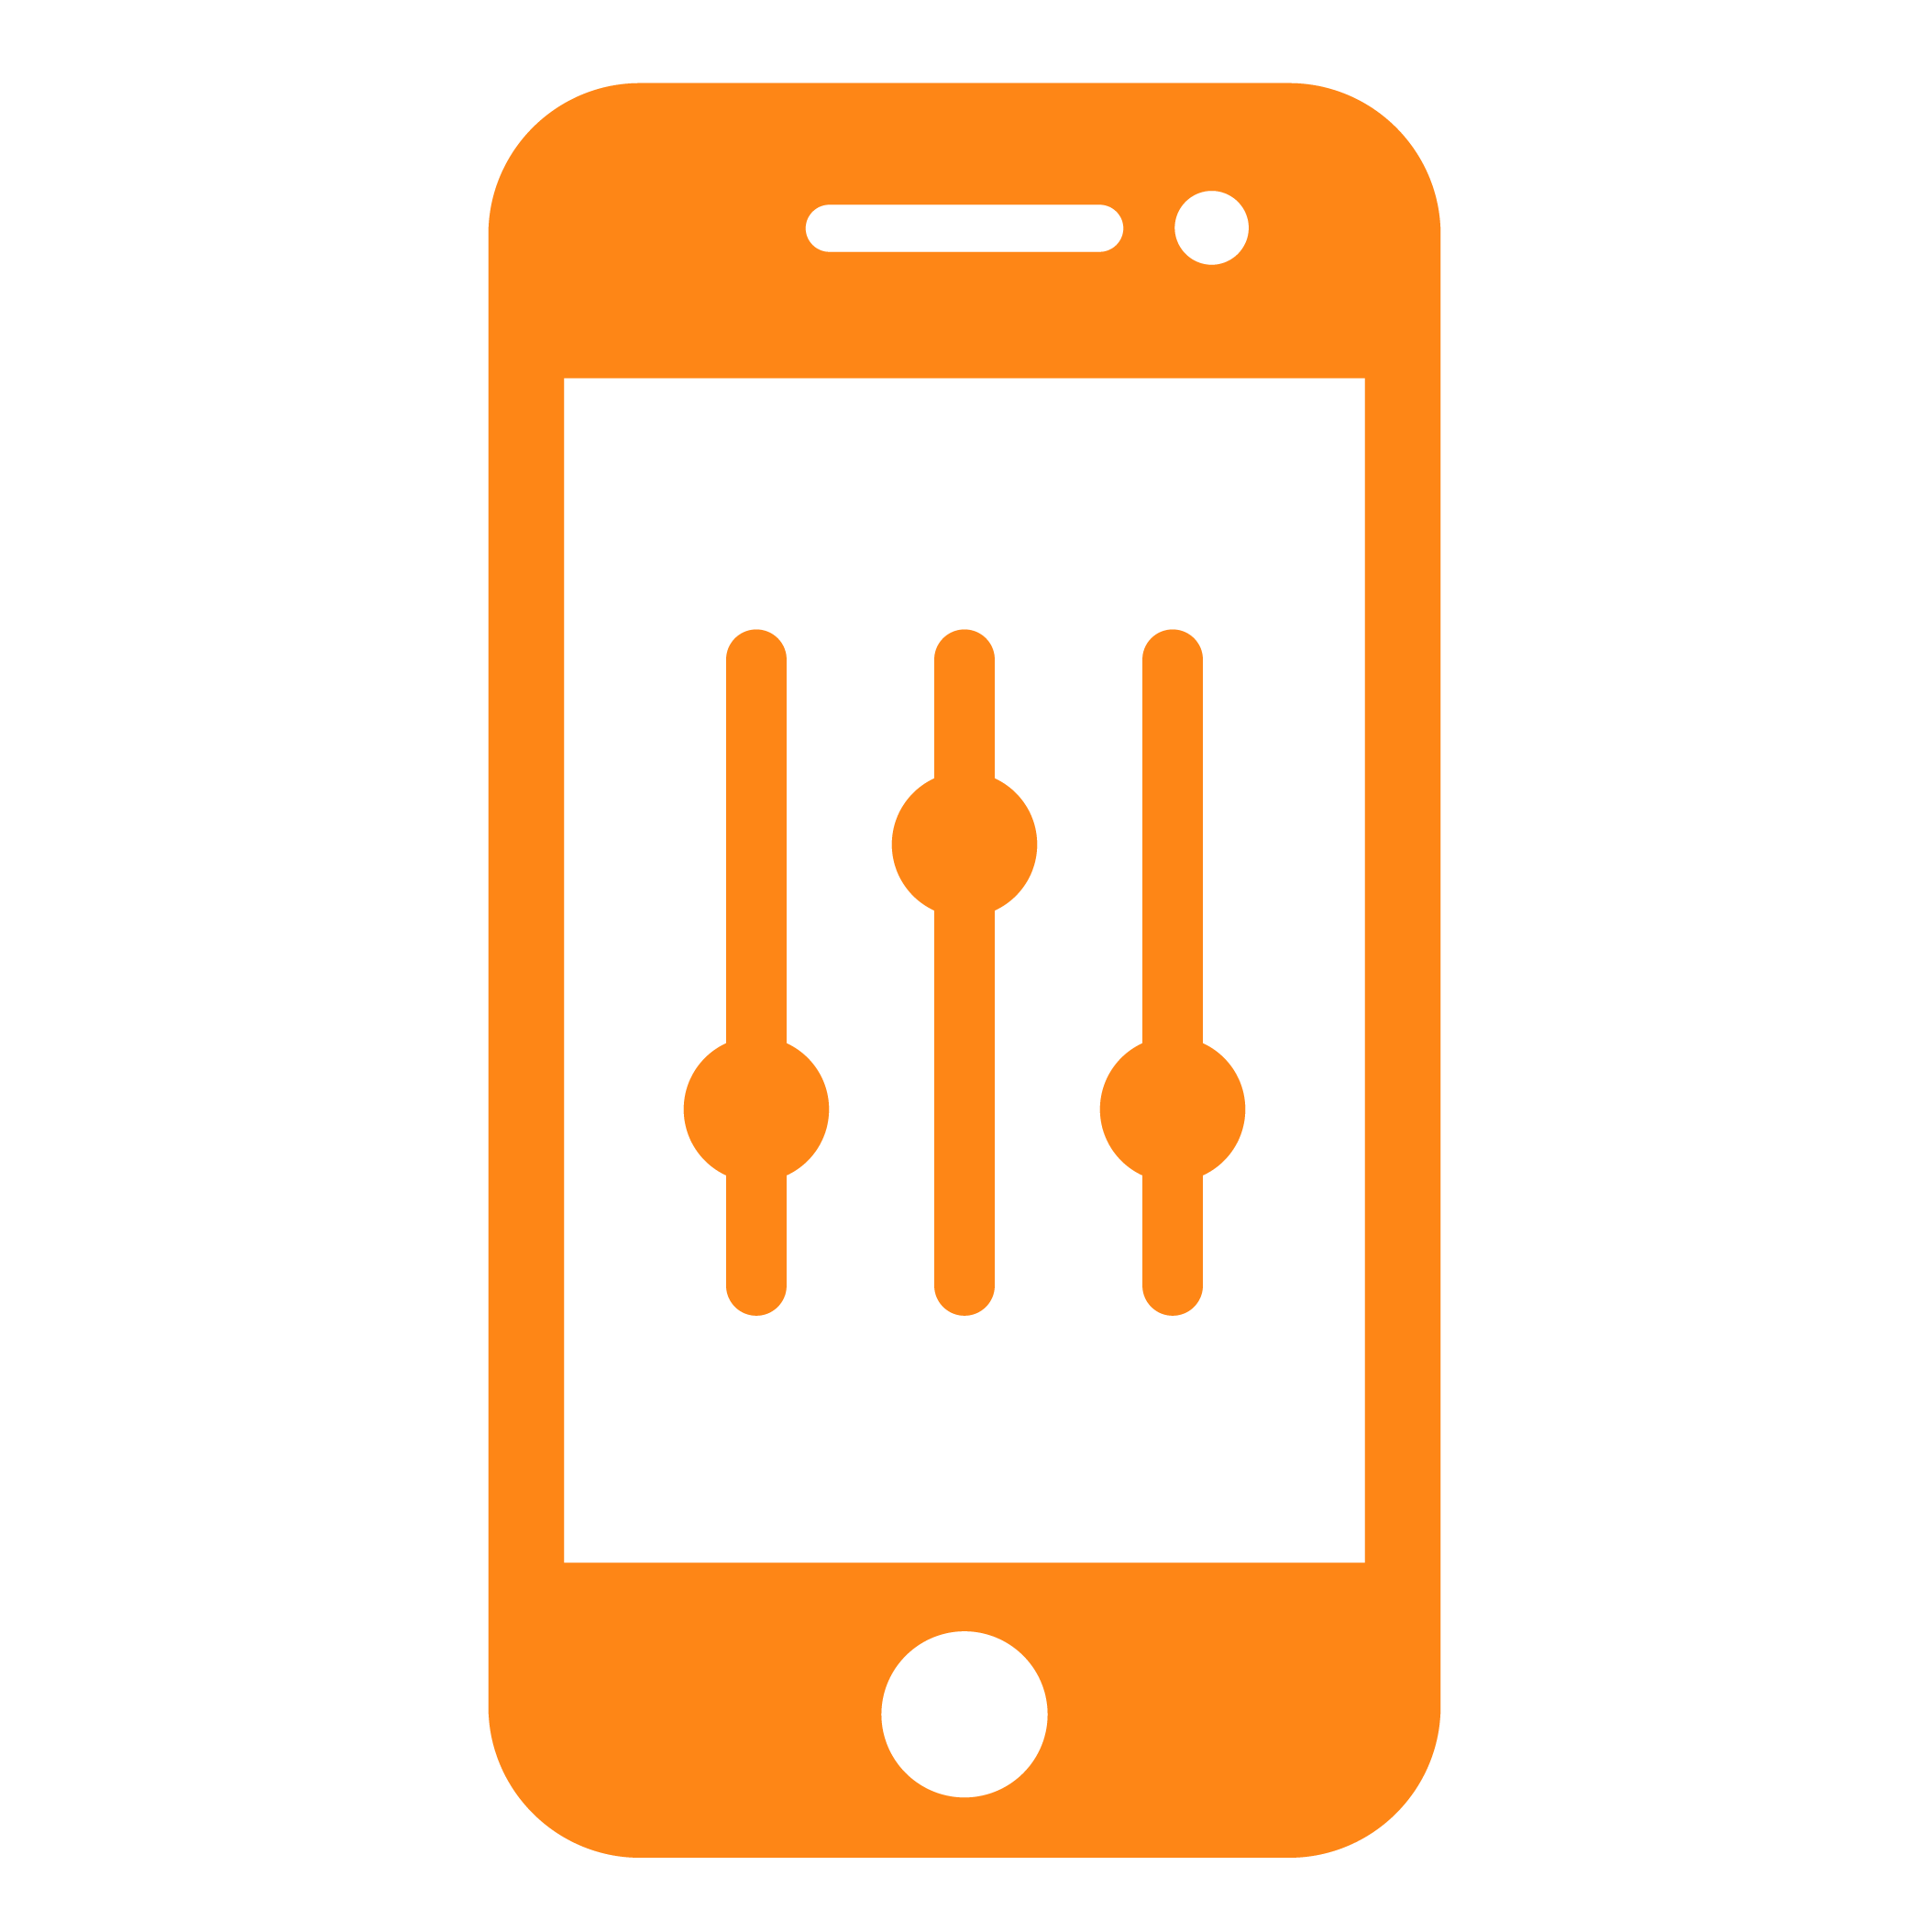 icon of phone with controls on phone screen